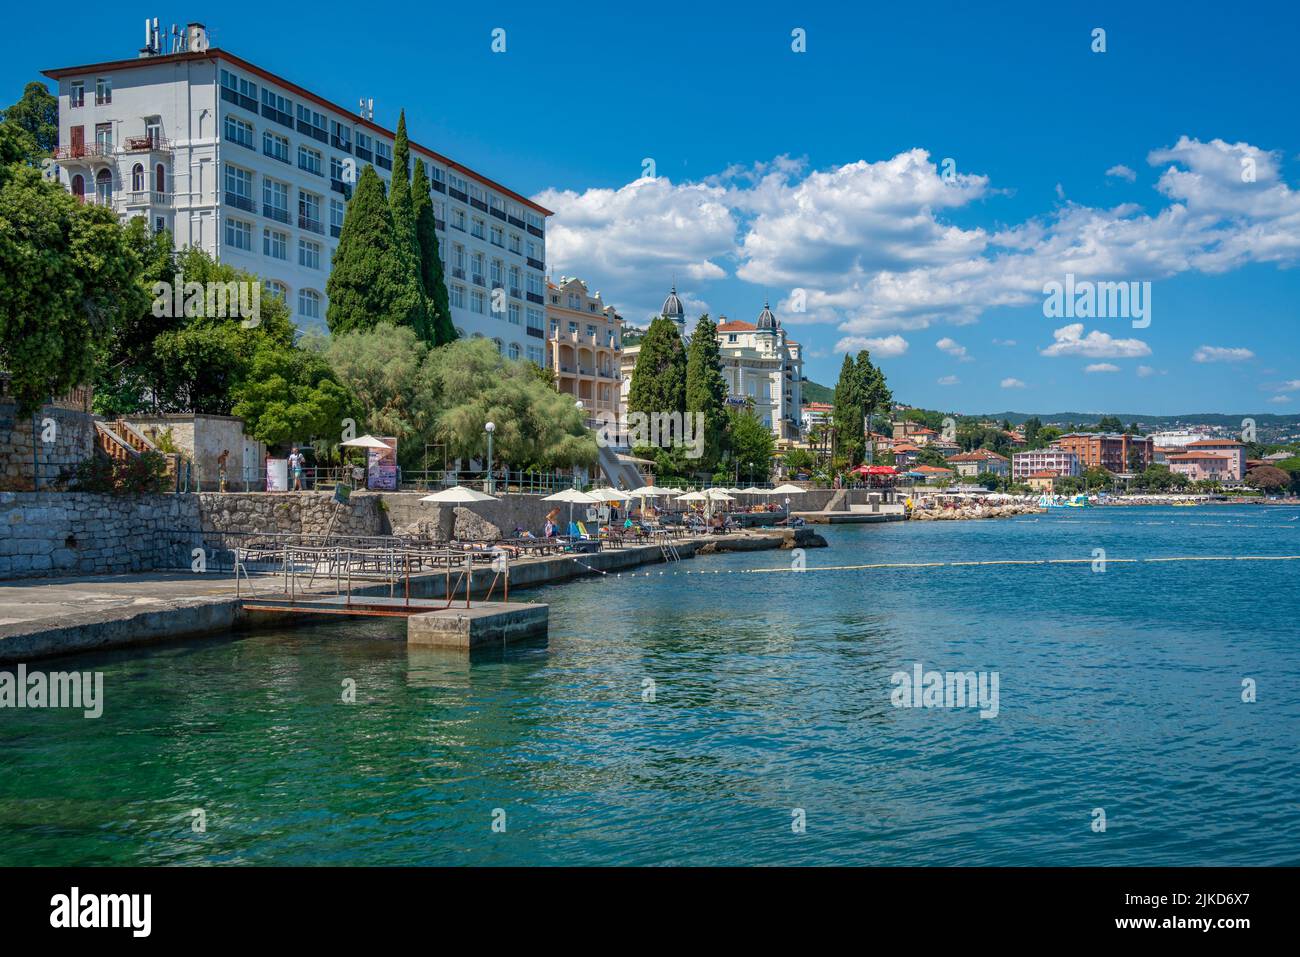 View of hotels and sunshades on The Lungomare promenade in the town of Opatija, Opatija, Kvarner Bay, Croatia, Europe Stock Photo